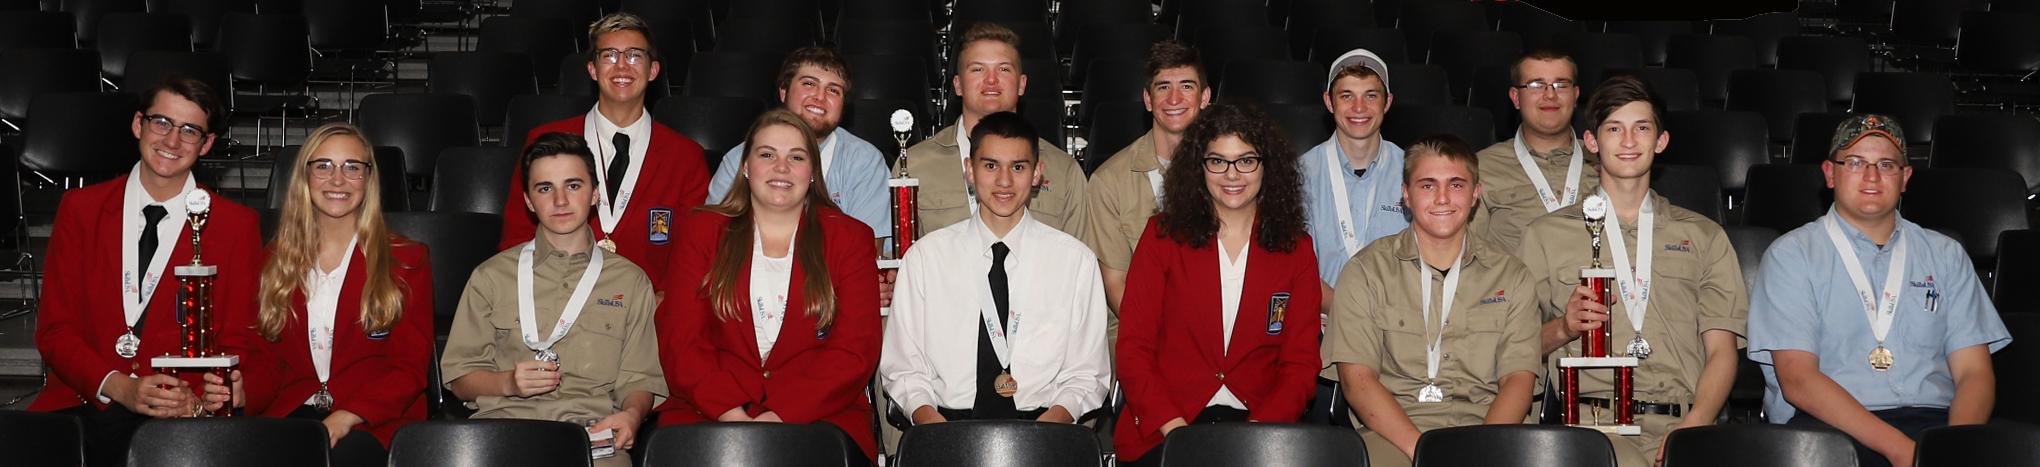 HUHS students receive awards SkillsUSA State Competition | By Teri Kermendy